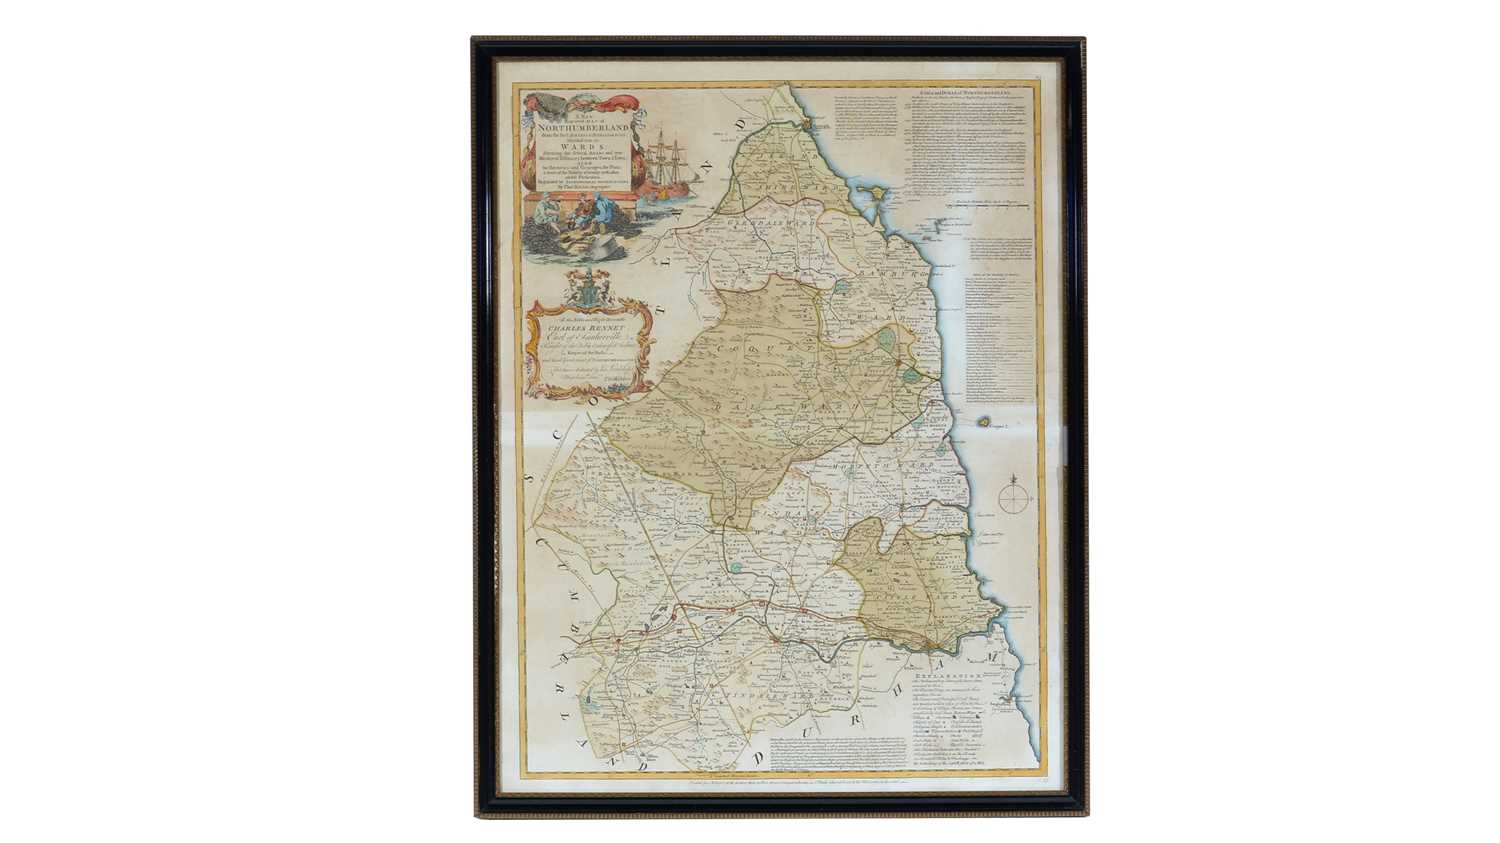 Lot 703 - Thomas Kitchin - A New and Improved Map of Northumberland | hand coloured engraving